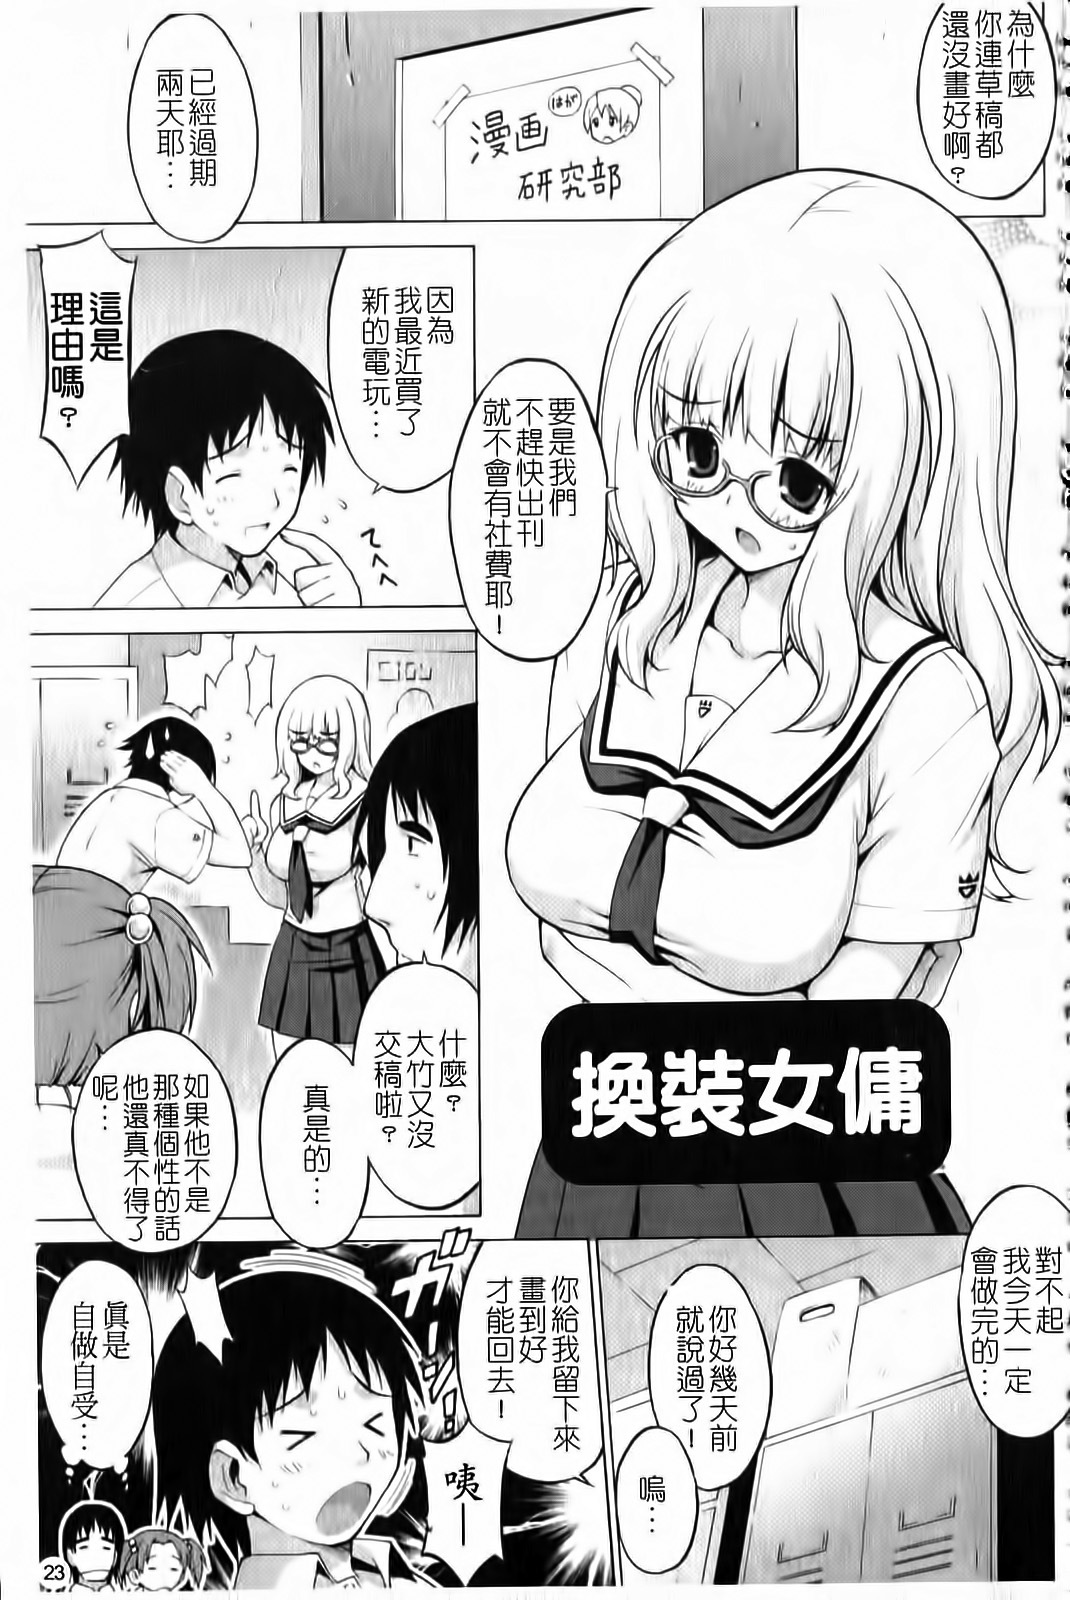 [Onomeshin] Oppai Party [Chinese] page 24 full